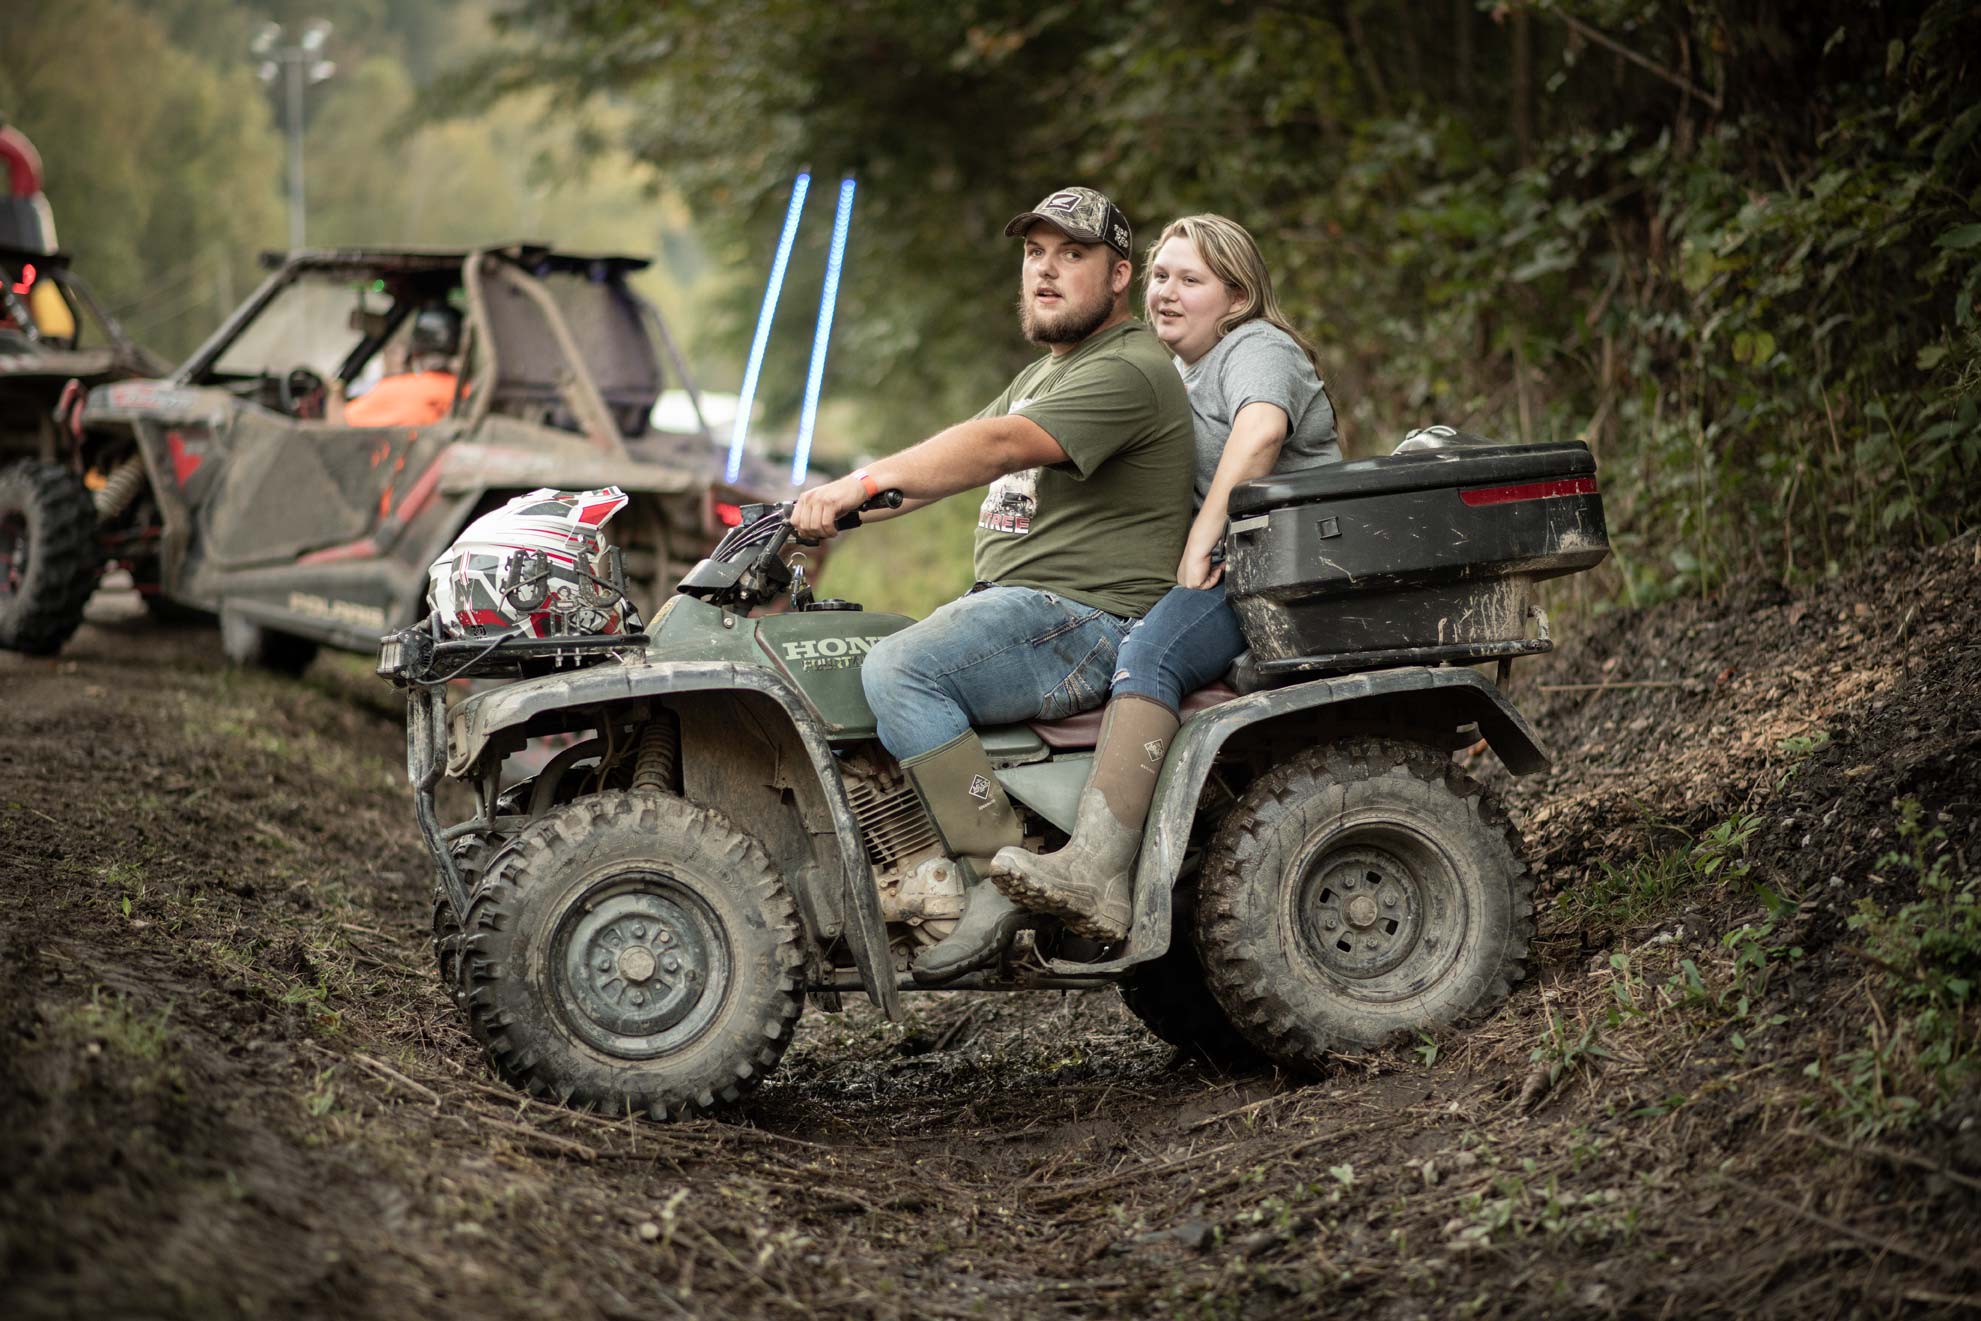 National Trailfest: A mand and a woman sit on an ATV in ditch waiting to ride